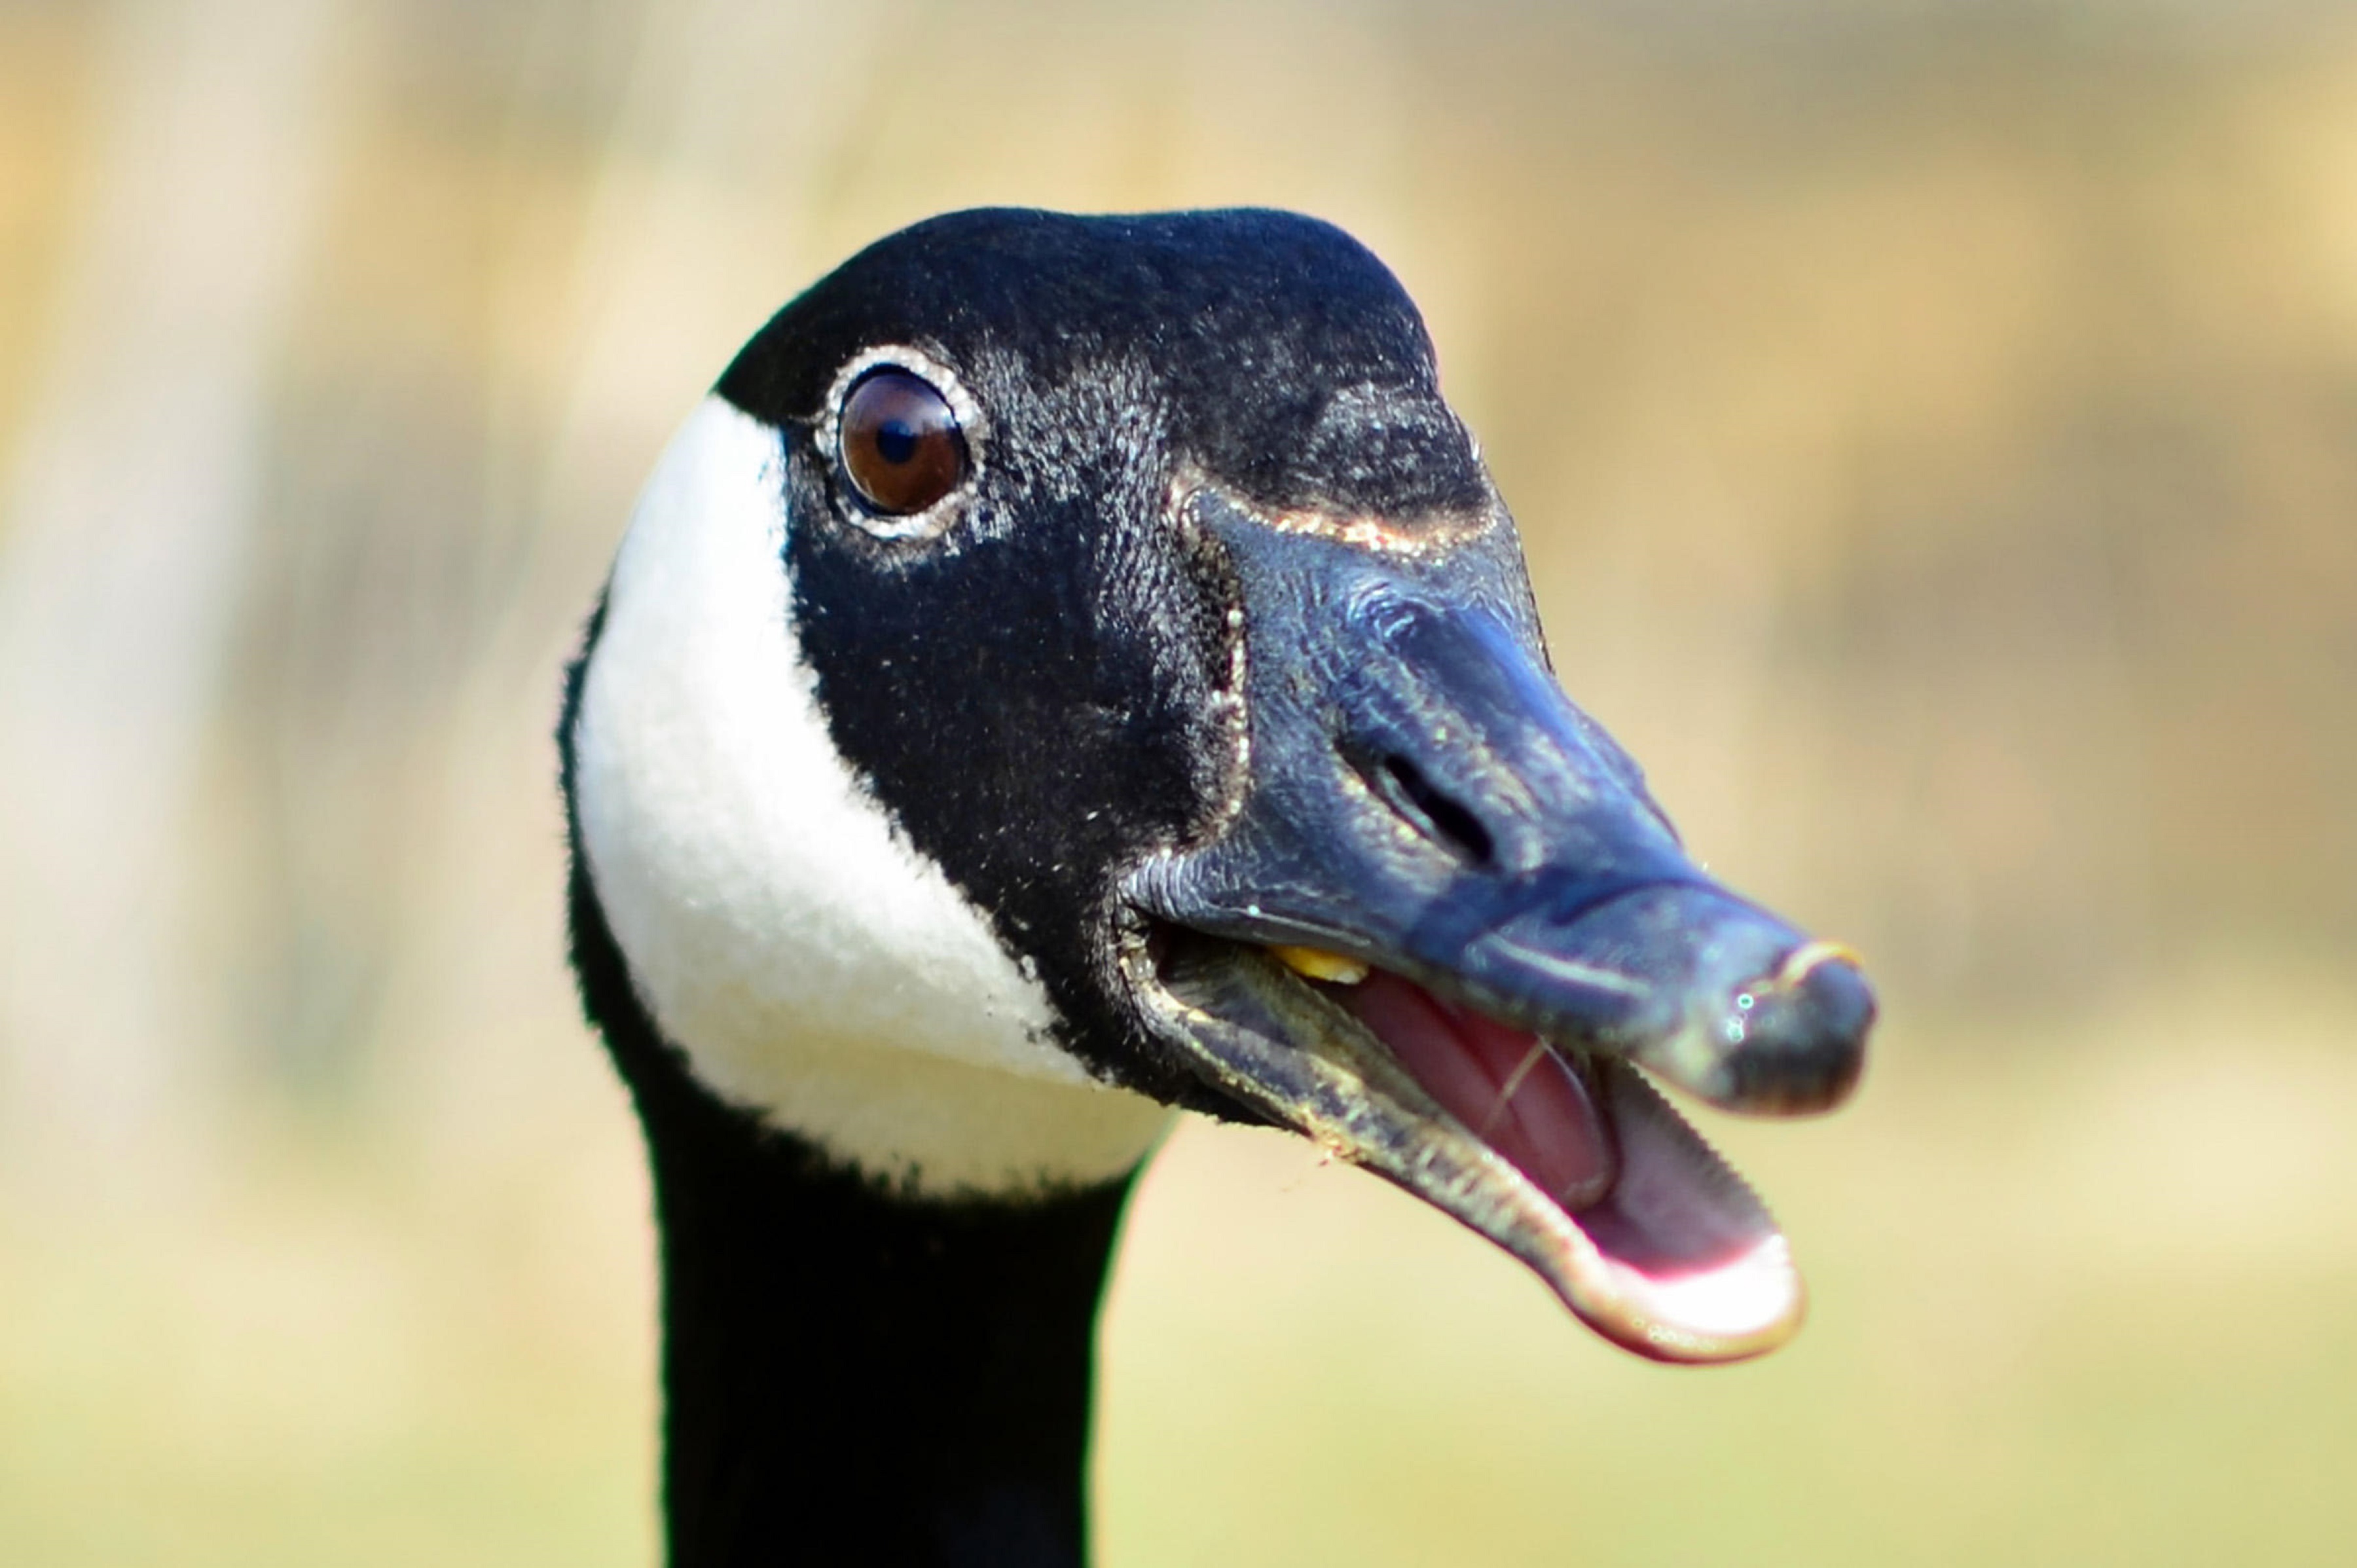 canada-goose-hd-wallpaper-background-image-3600x2395-id-615915-wallpaper-abyss